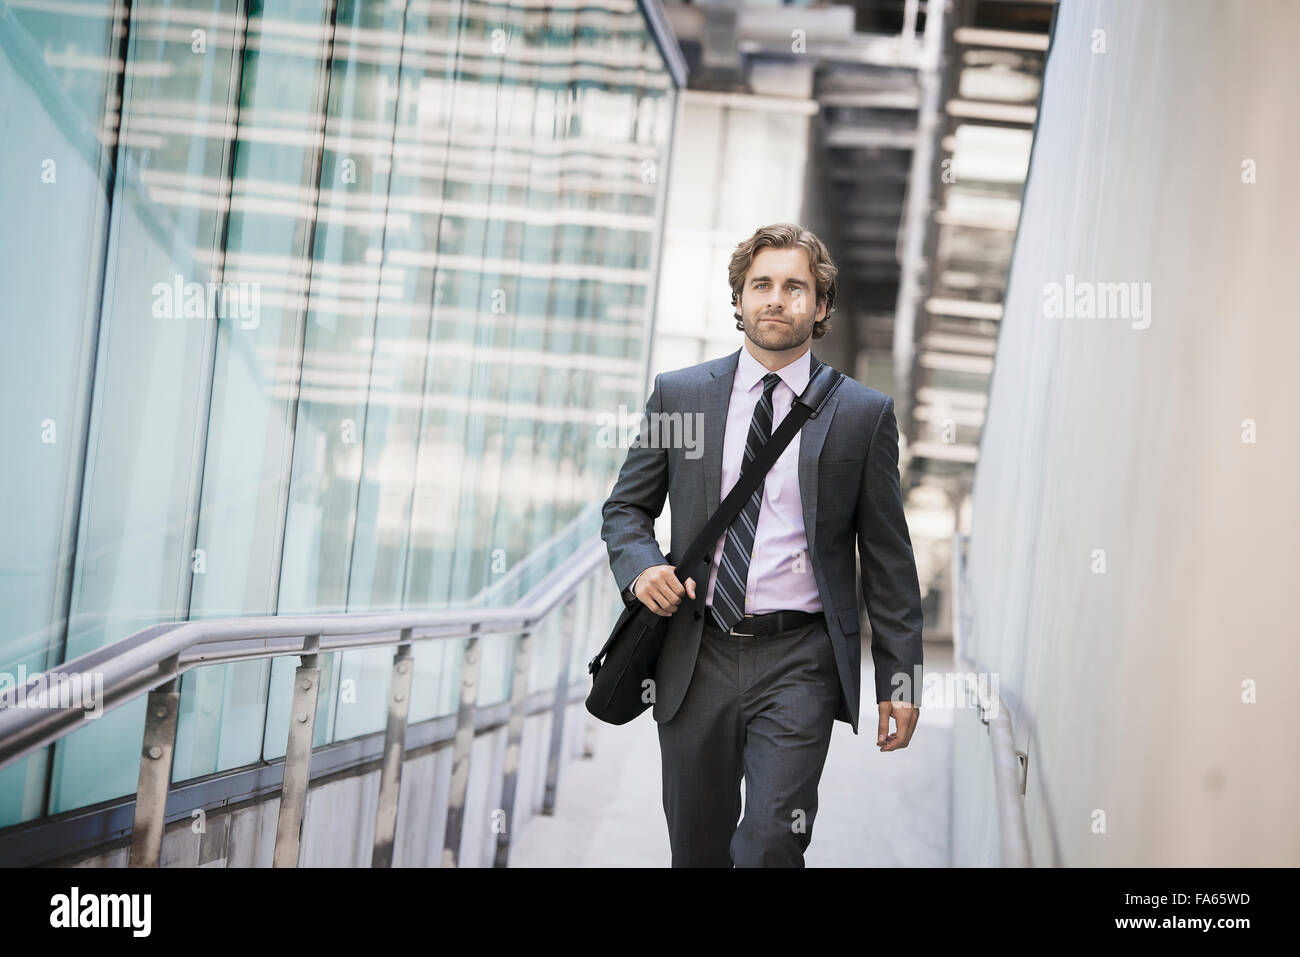 A man carrying a computer bag with a strap on a city walkway. Stock Photo